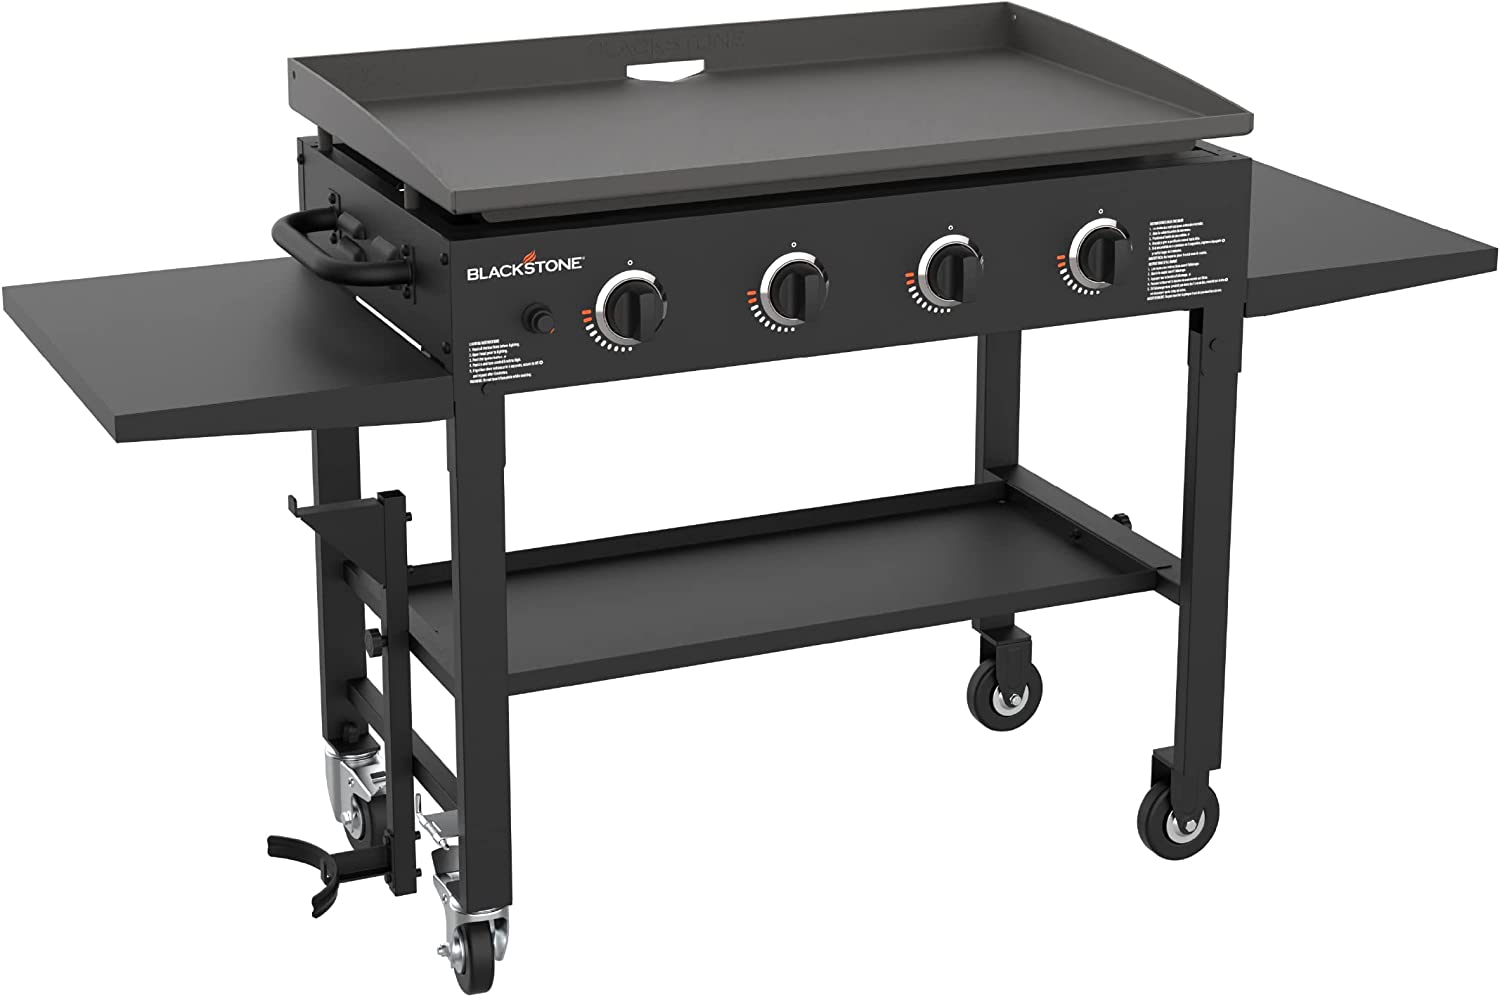 Blackstone 1554 Heat Retention Professional Outdoor Griddle, 36-Inch